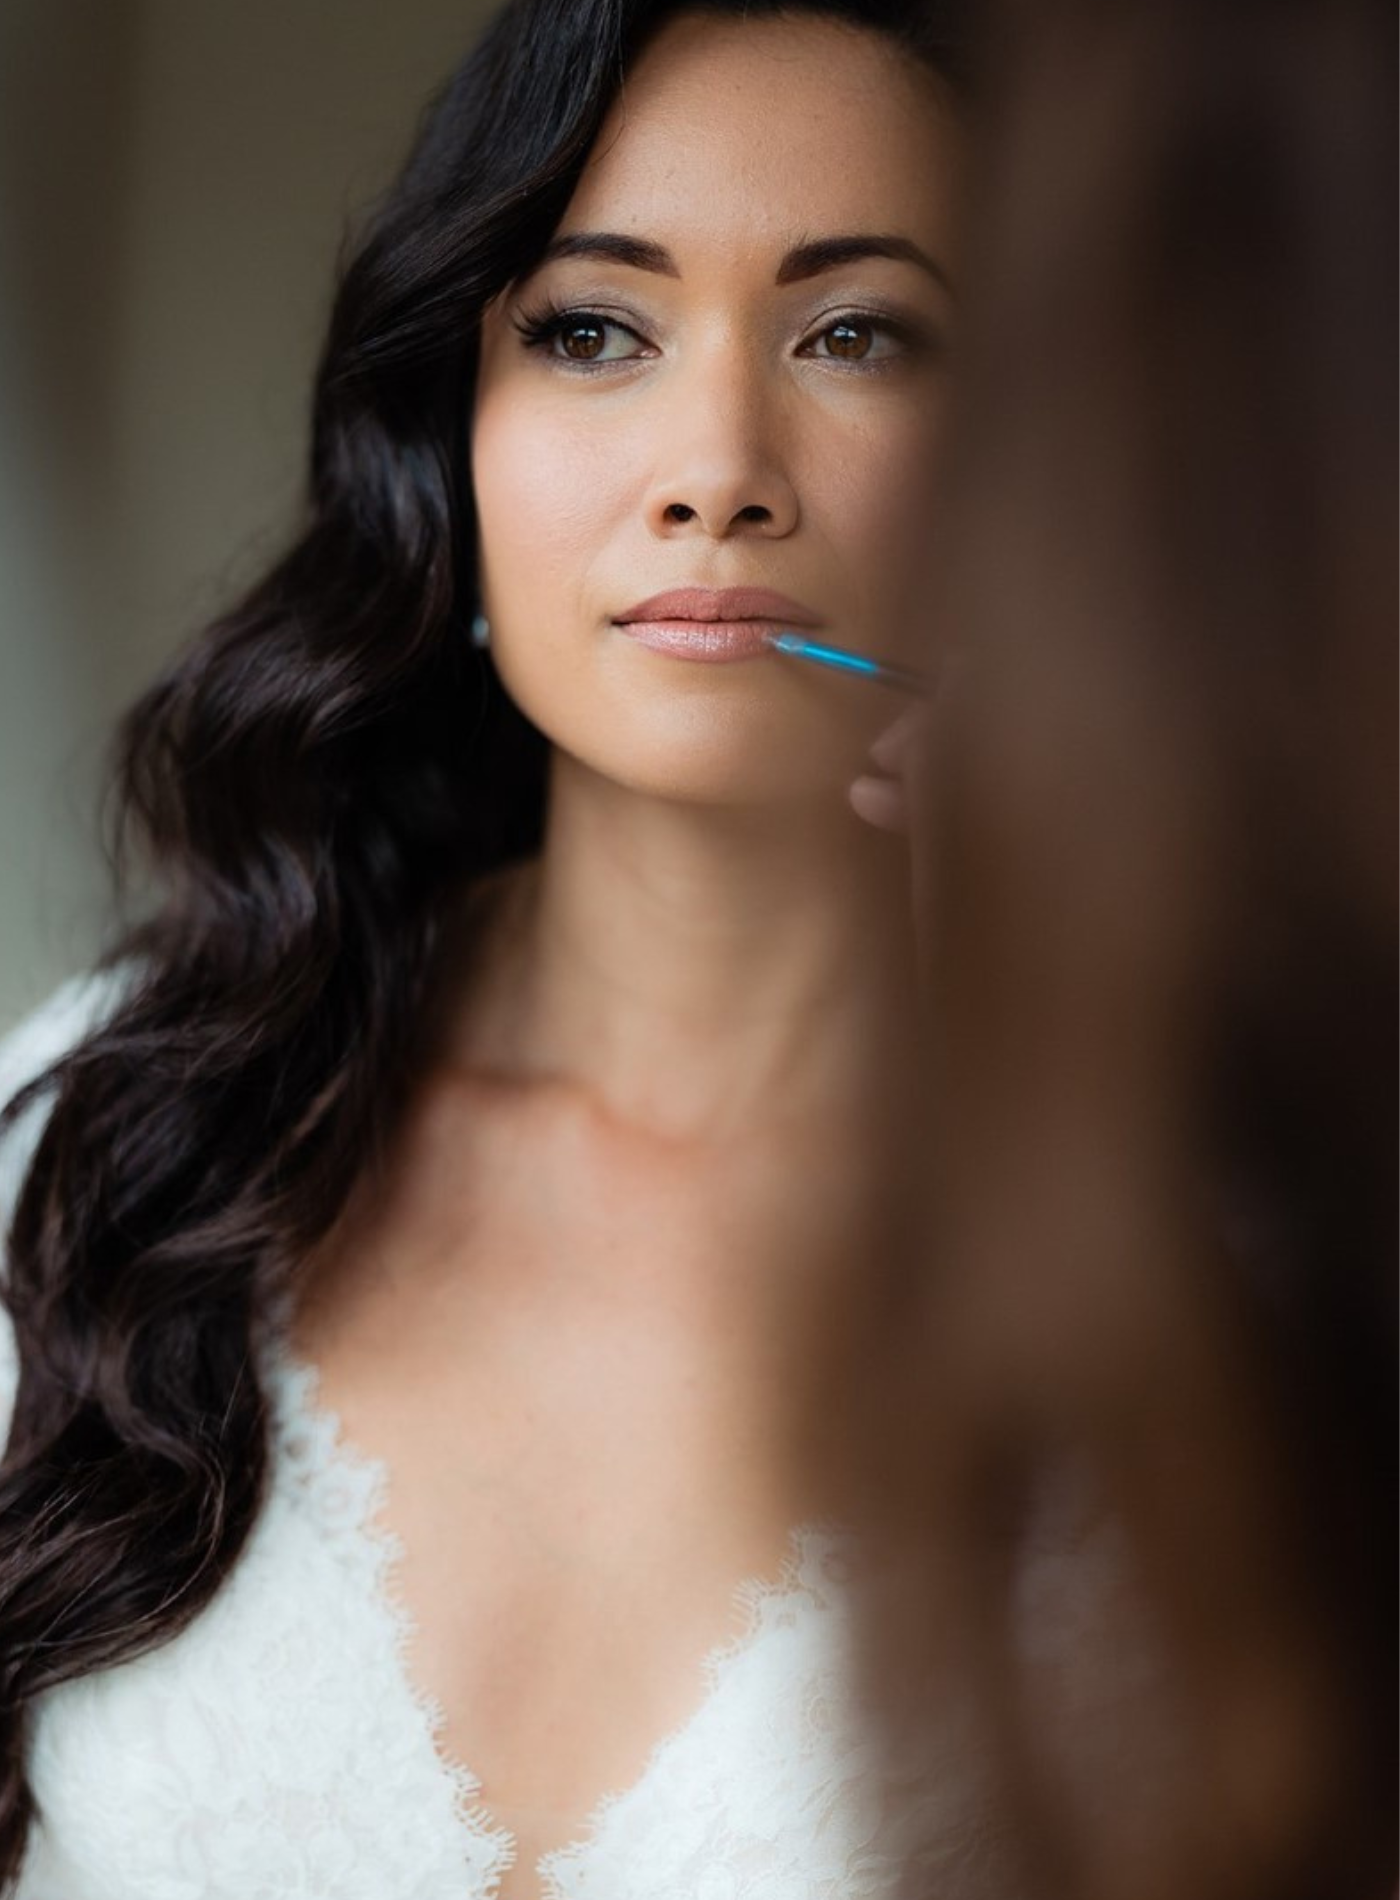 Crafting Your Picture-Perfect Wedding Day Look